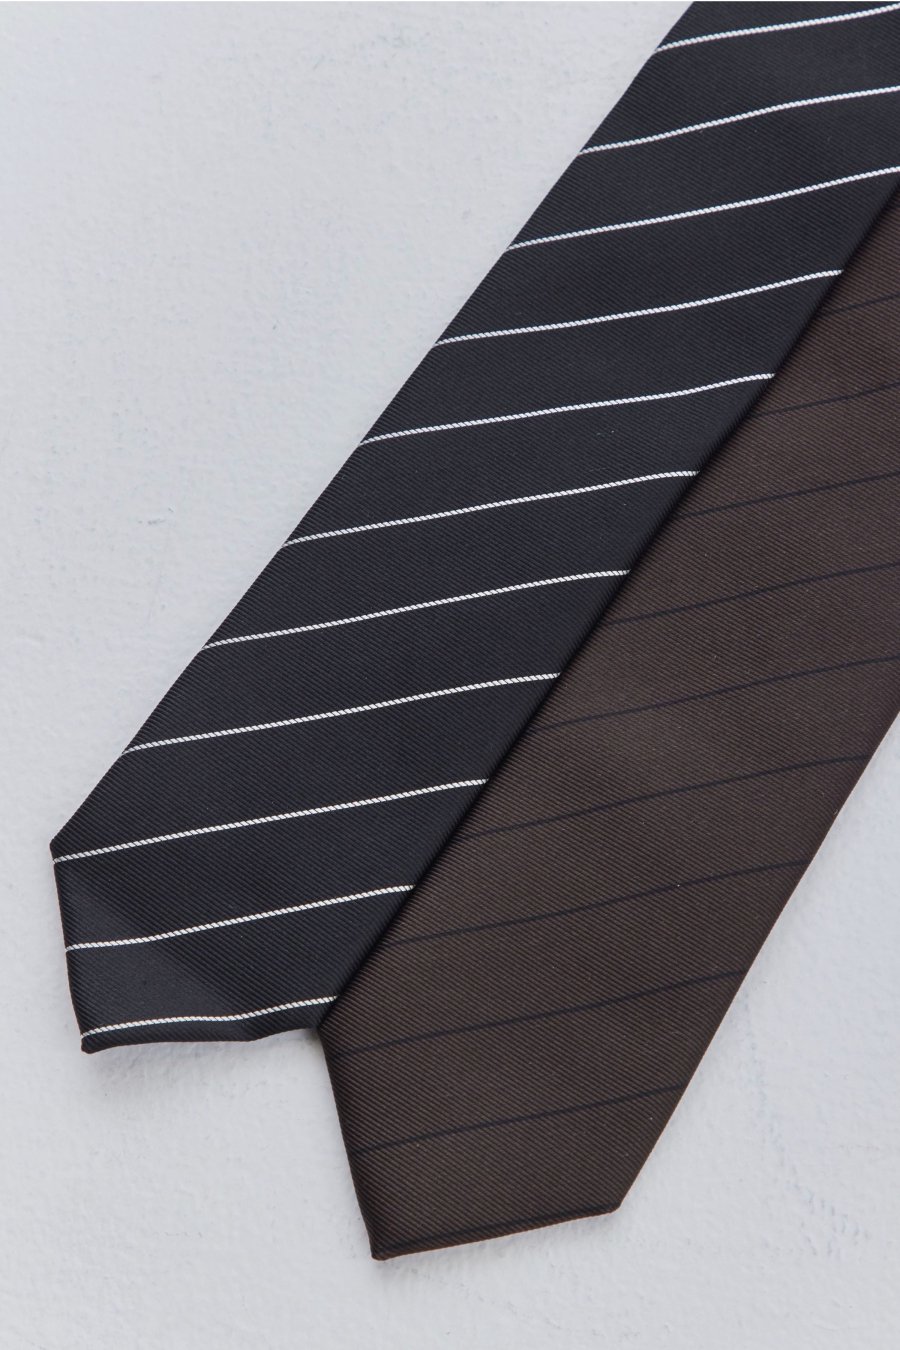 LITTLEBIG  22aw Silk Stripe Tie（BLACK or BROWN）<img class='new_mark_img2' src='https://img.shop-pro.jp/img/new/icons15.gif' style='border:none;display:inline;margin:0px;padding:0px;width:auto;' />